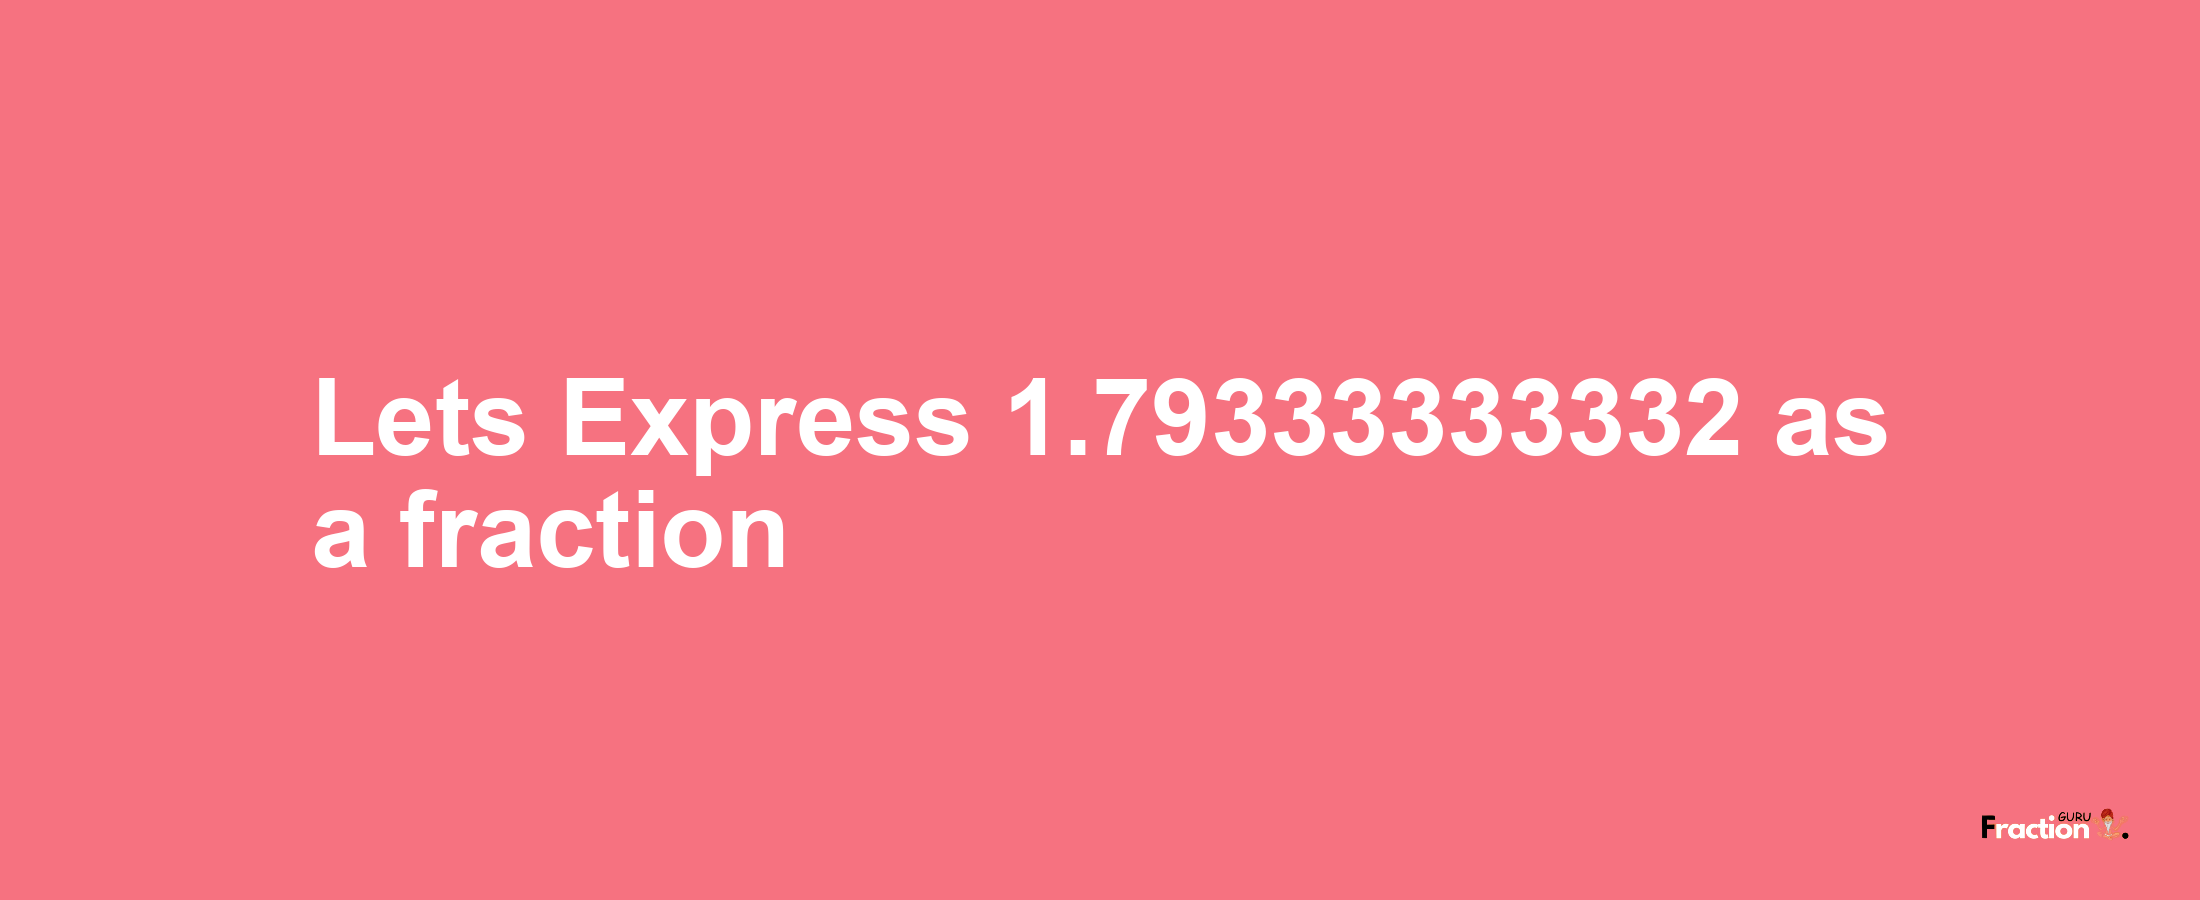 Lets Express 1.79333333332 as afraction